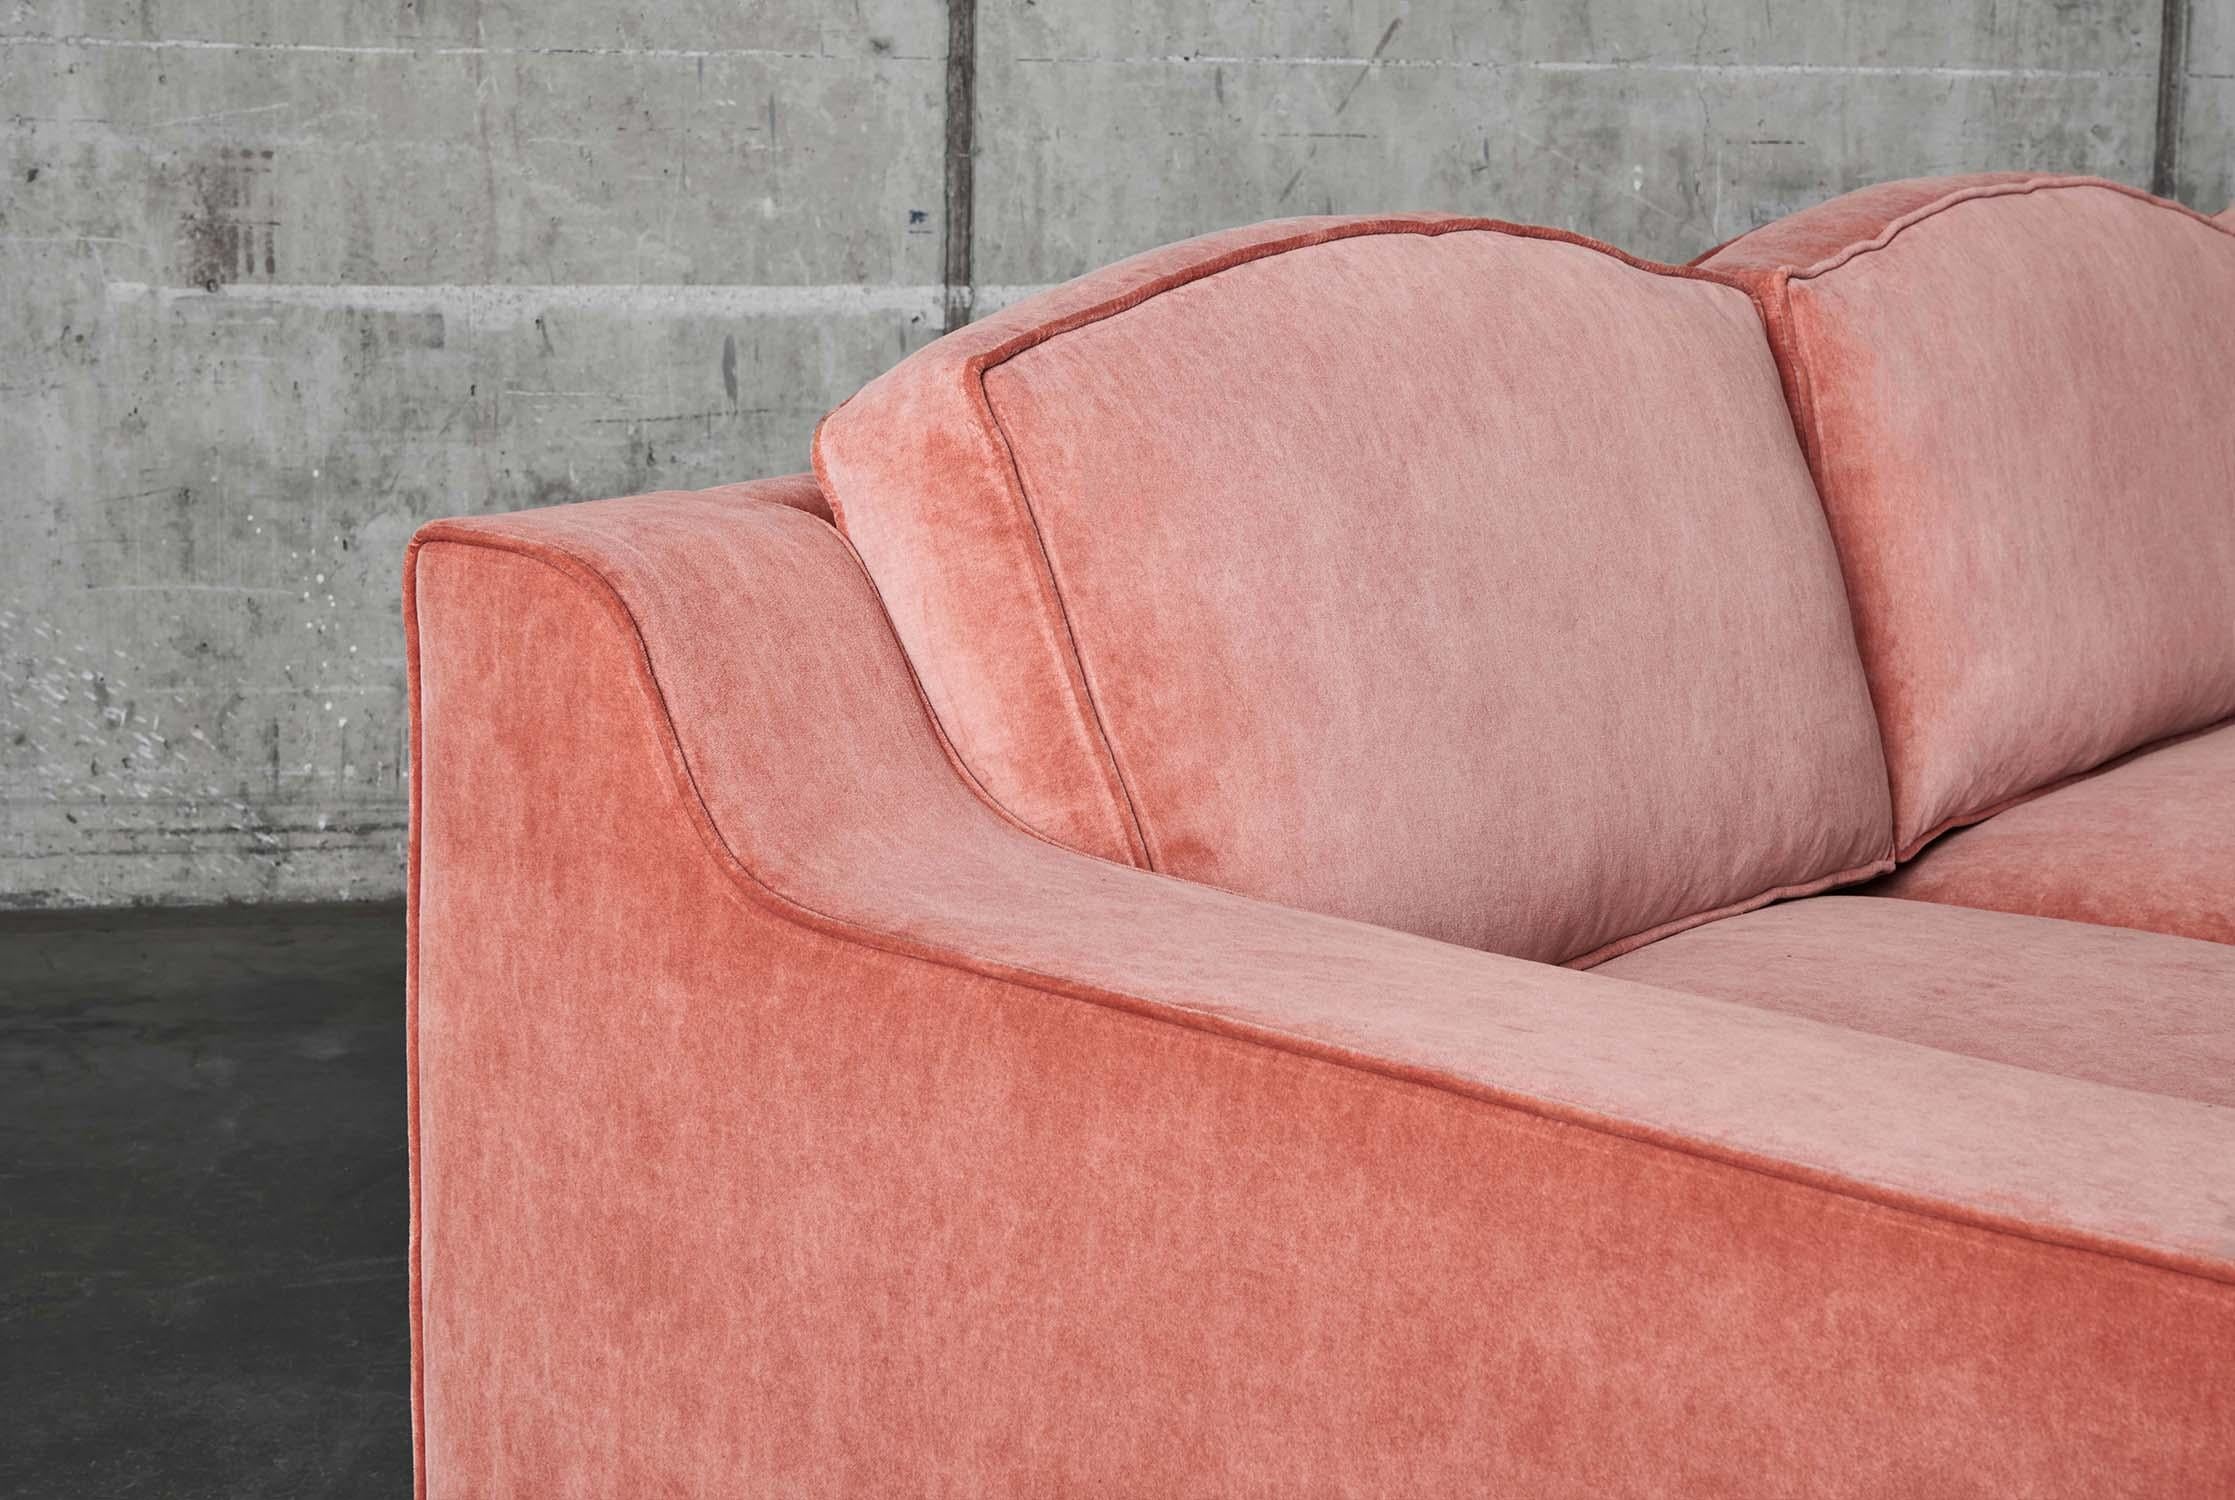 Lola, named after our daughter. The sofa consists of a frame in solid beech and plywood and has loose cushions with layers of different cold foam, polyether, fiber filling and down for a firm as well as comfortable sofa in one. DD Lola Sofa has an